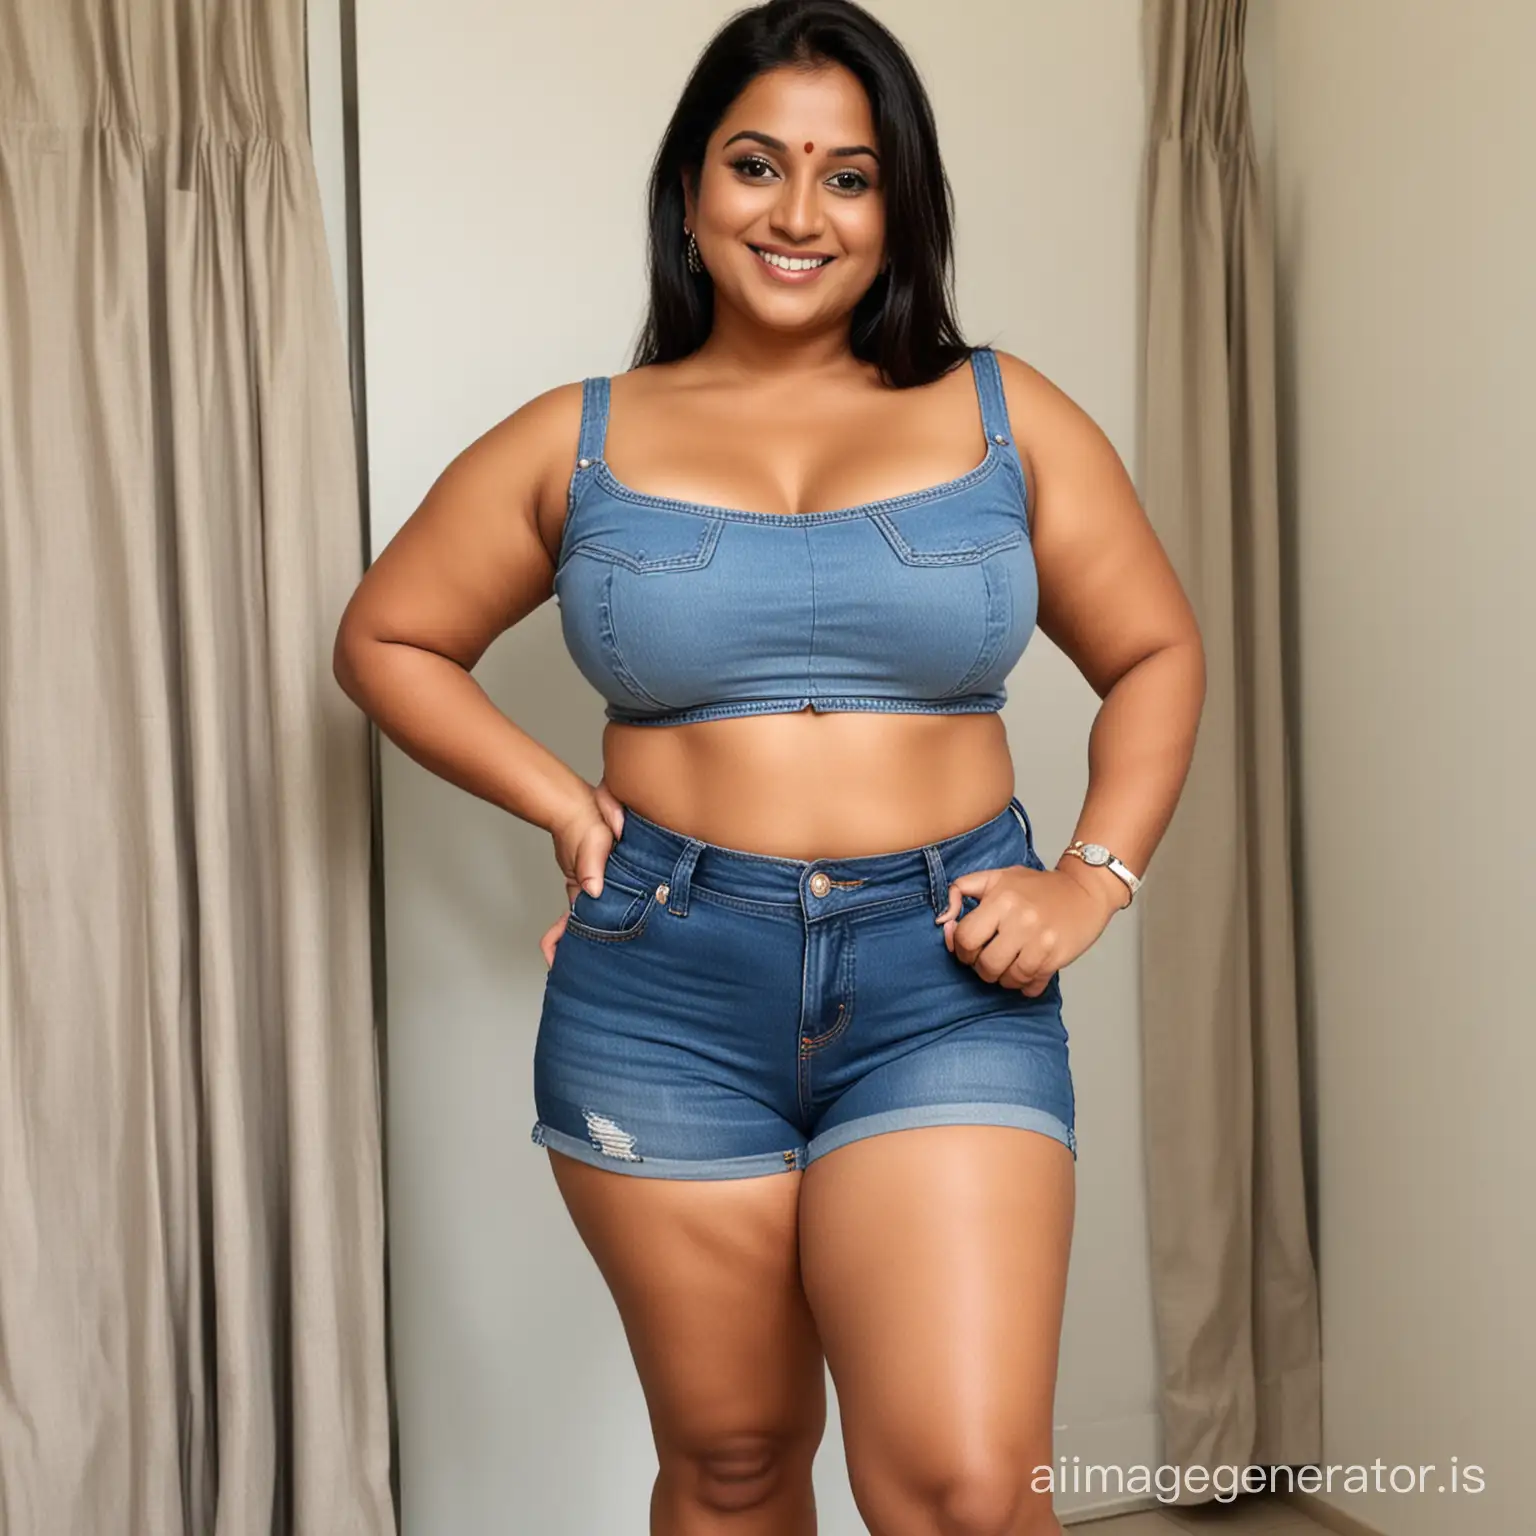 Charming-Indian-Mother-Poses-in-Croptop-and-Shorts-with-a-Playful-Smile